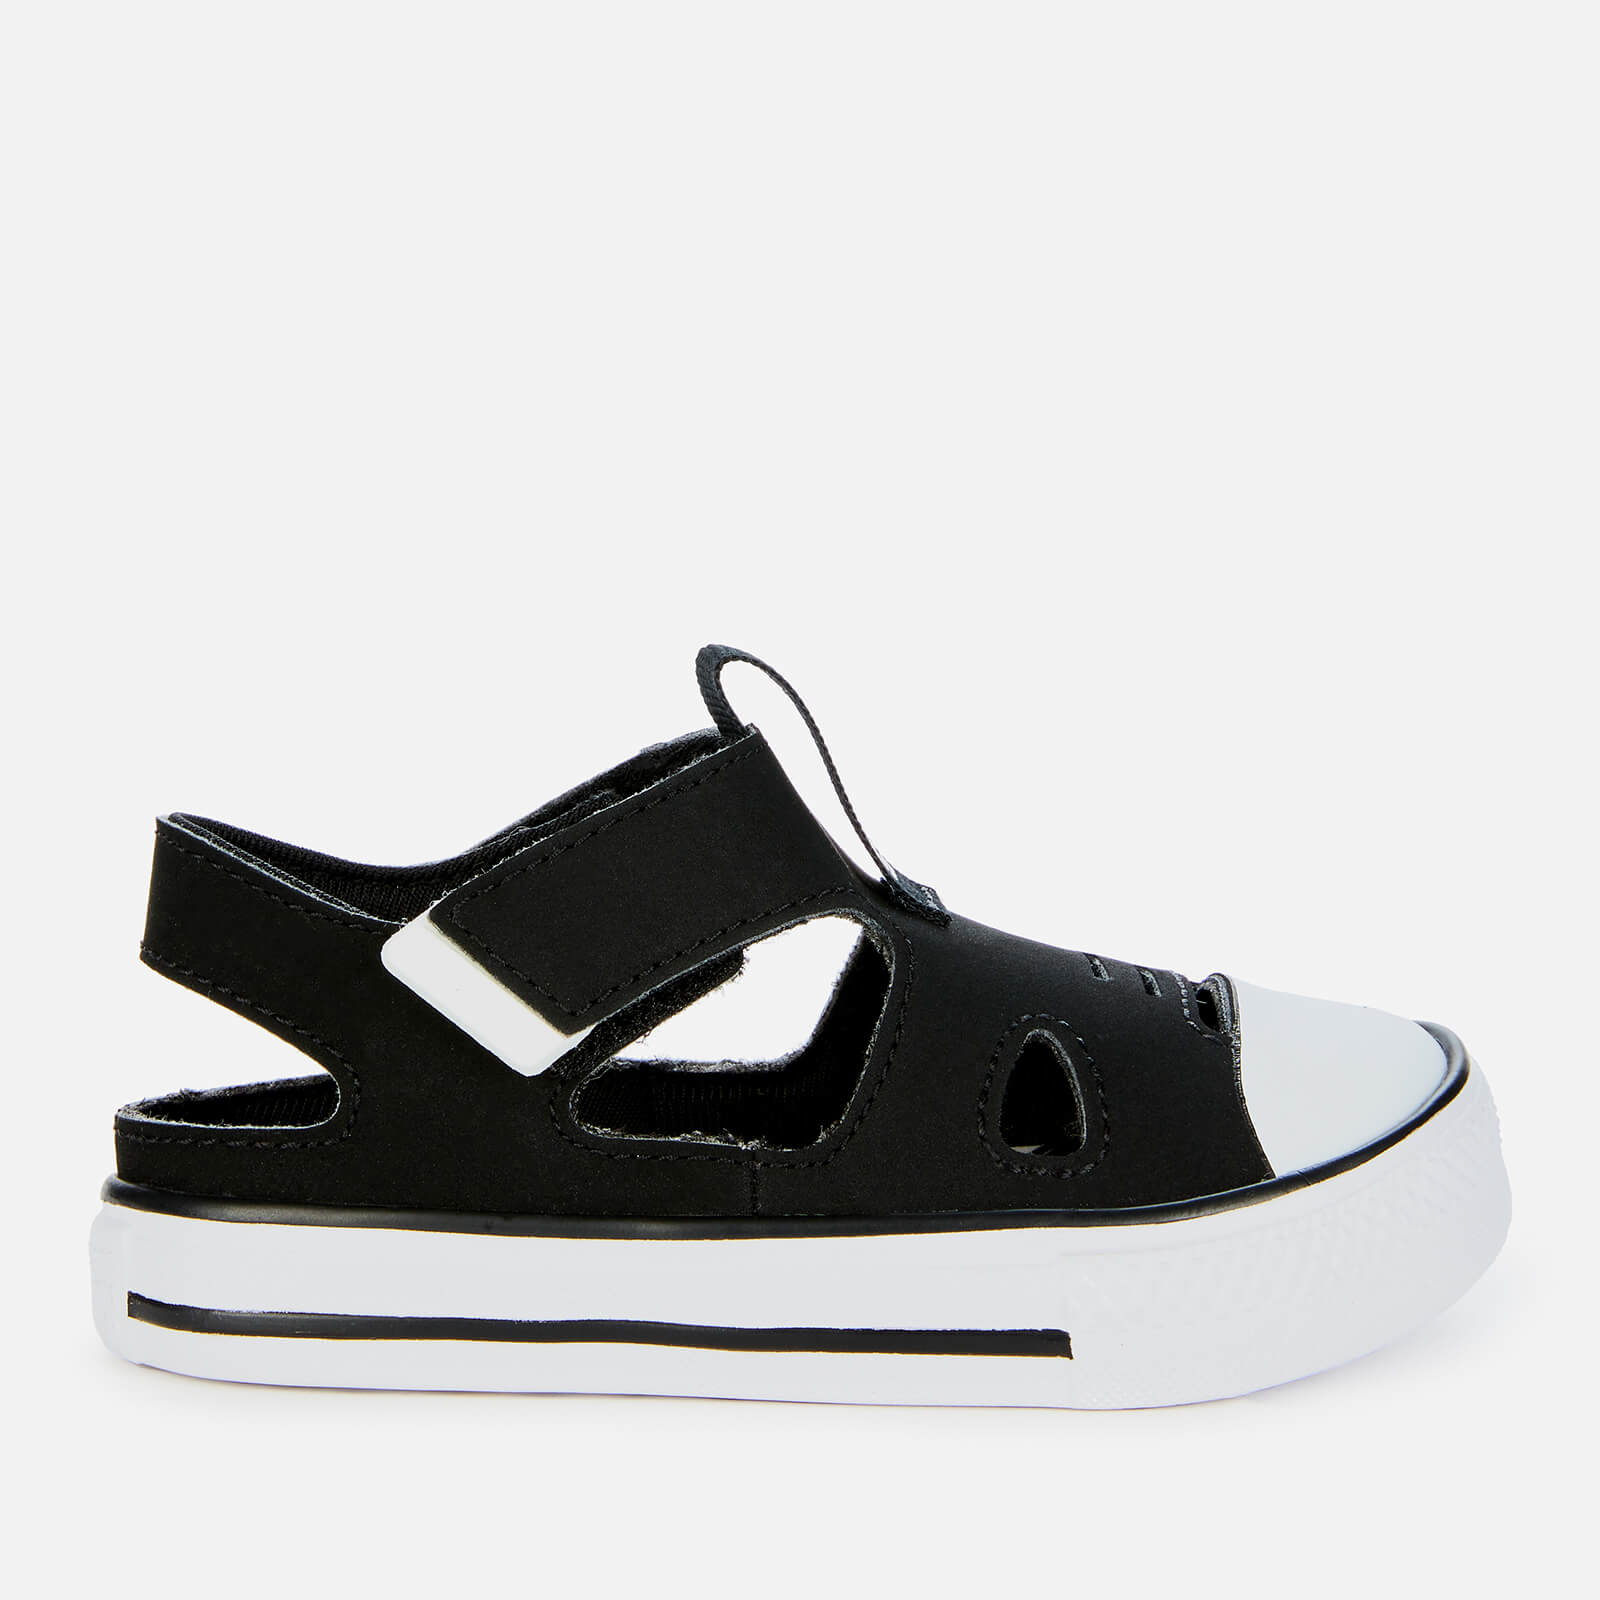 Converse Toddlers' Chuck Taylor All Star Superplay Sandal Ox Sandals - Black - UK 4 Toddler